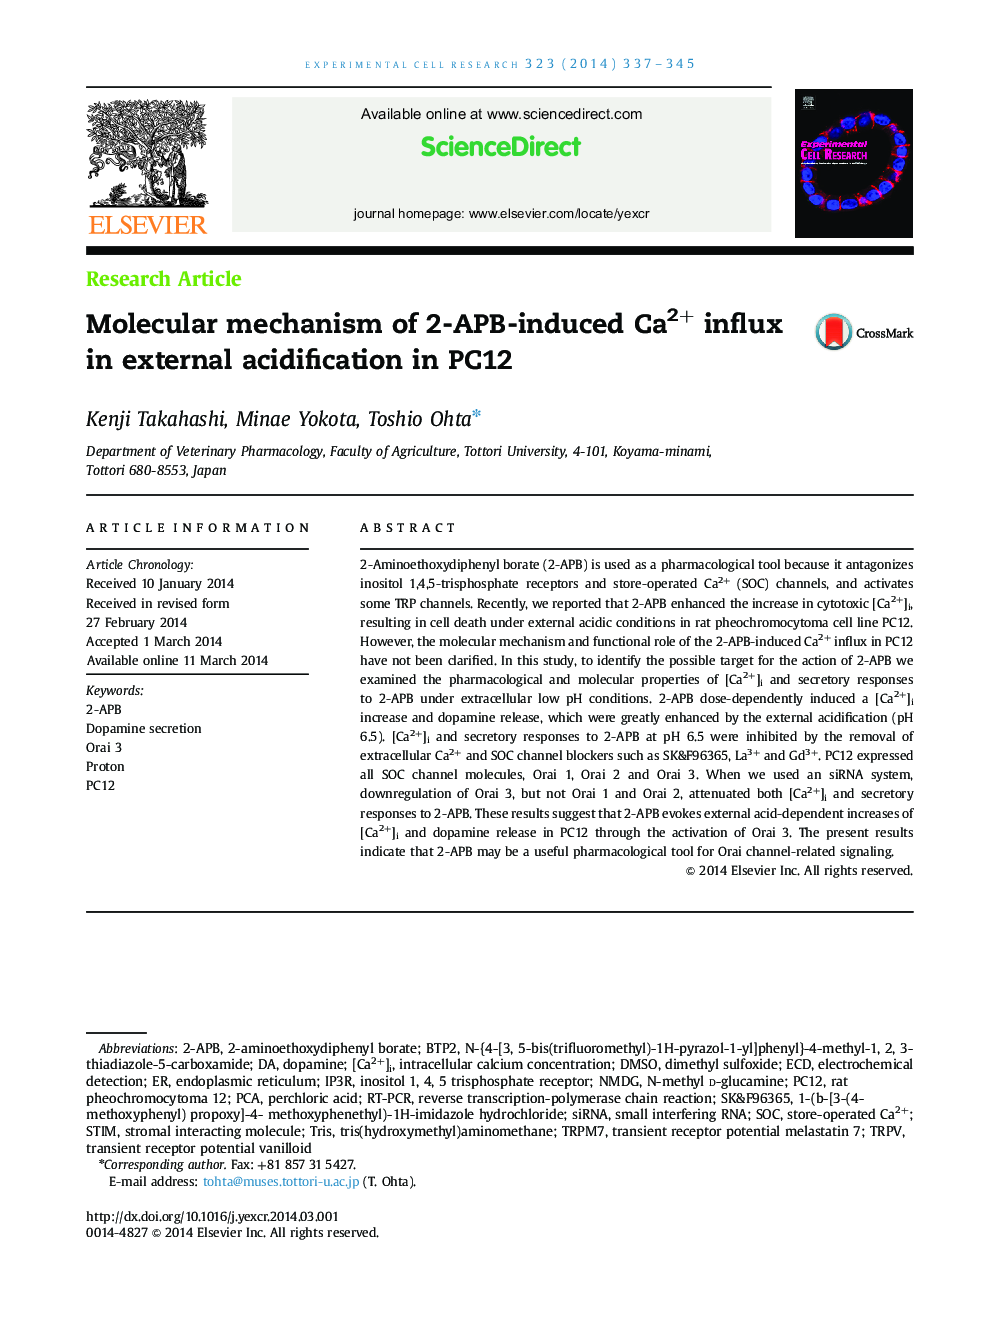 Molecular mechanism of 2-APB-induced Ca2+ influx in external acidification in PC12